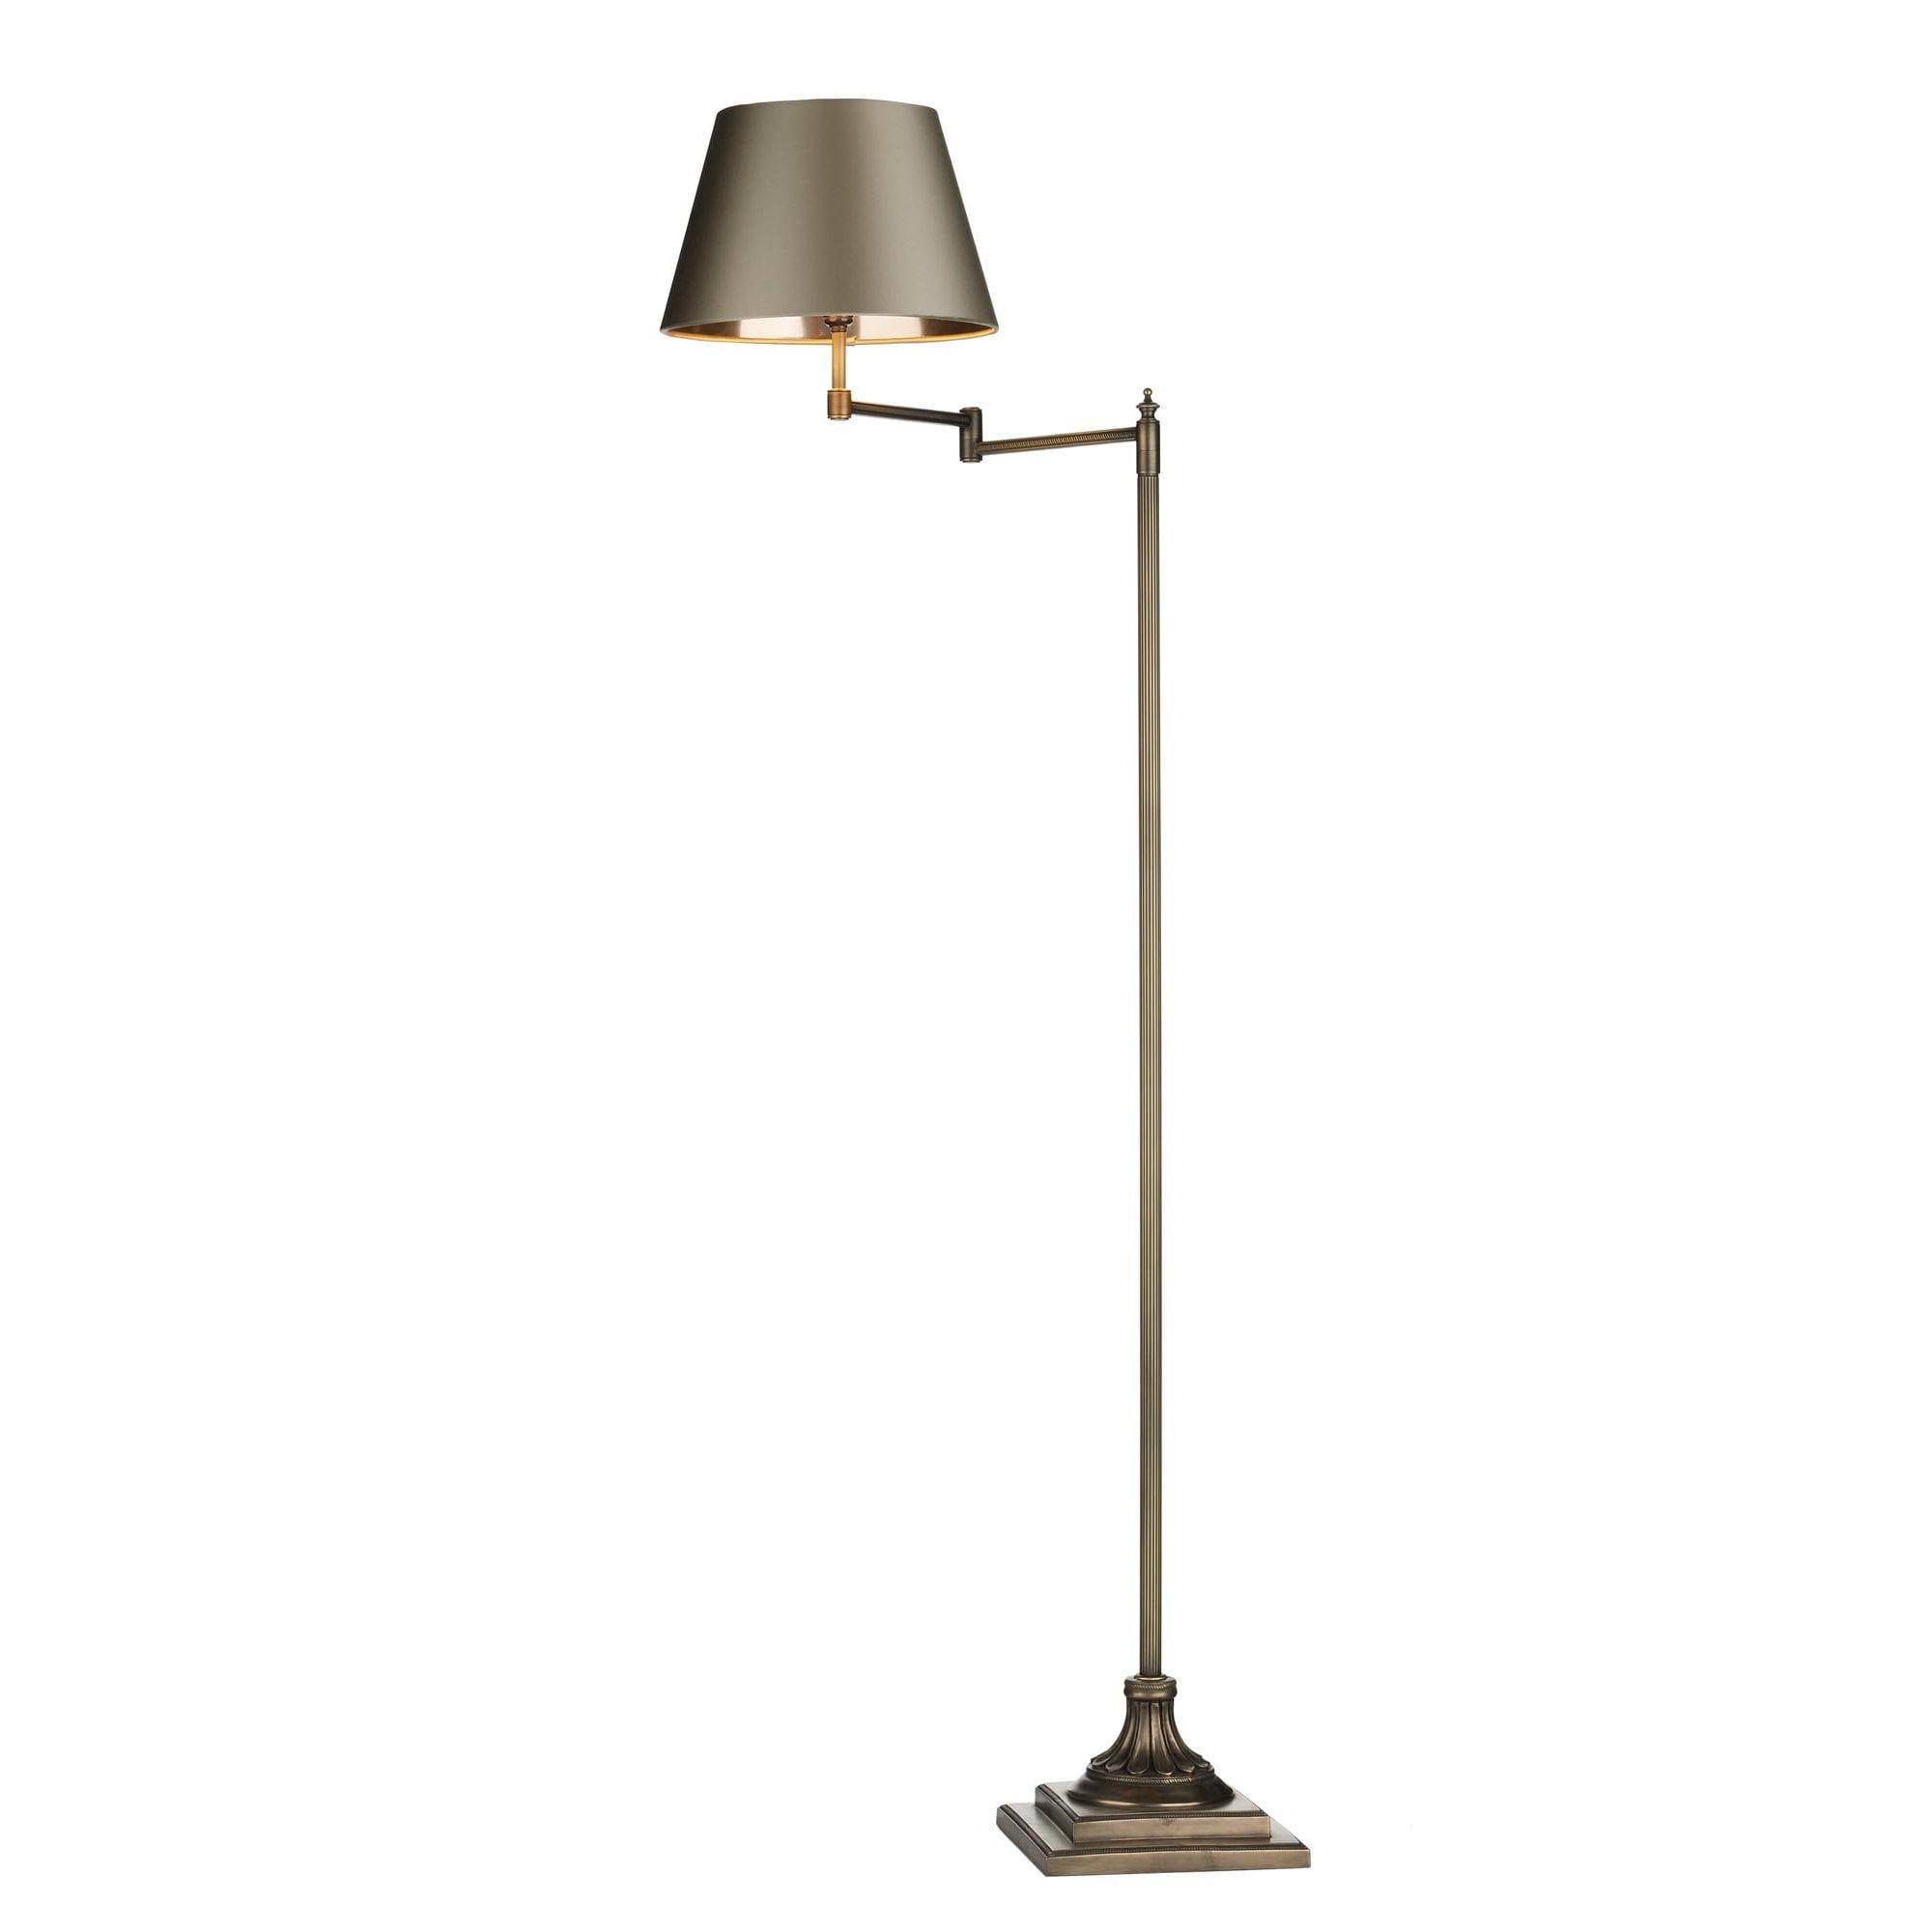 Floor Lamp Antique Brass With Swivel Arm Right Lighting And Lights Uk For Adjustble Arm Floor Lamps (View 15 of 20)